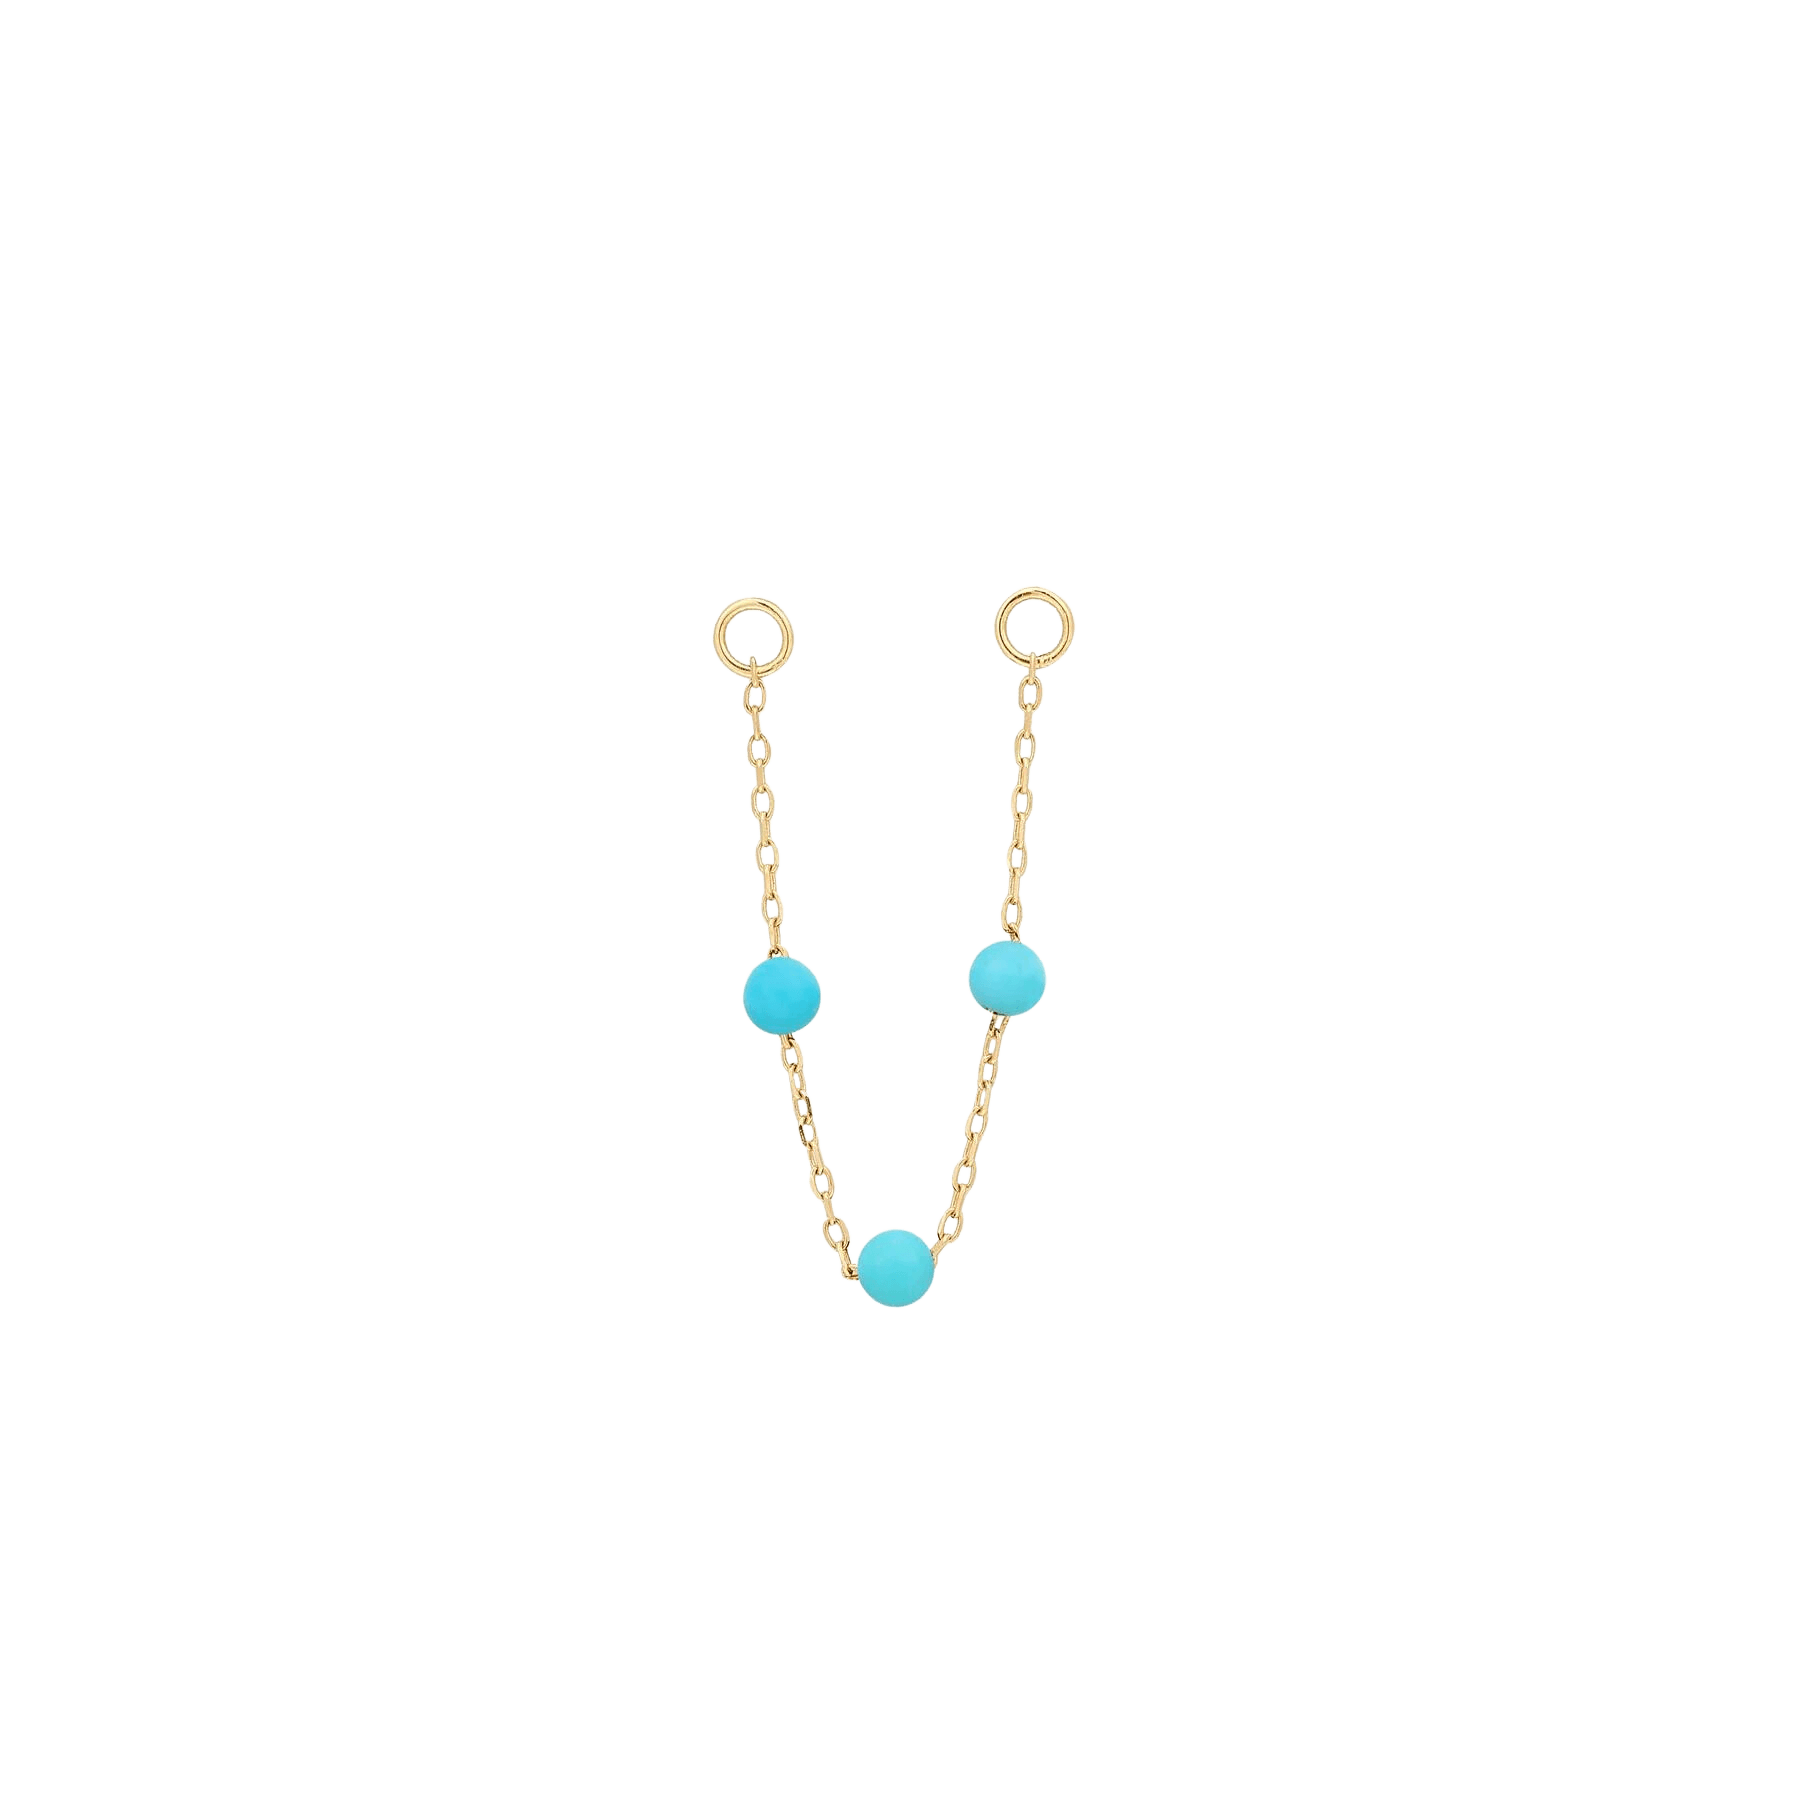 3 Bead Turquoise Chain - Solid 14Kt Gold